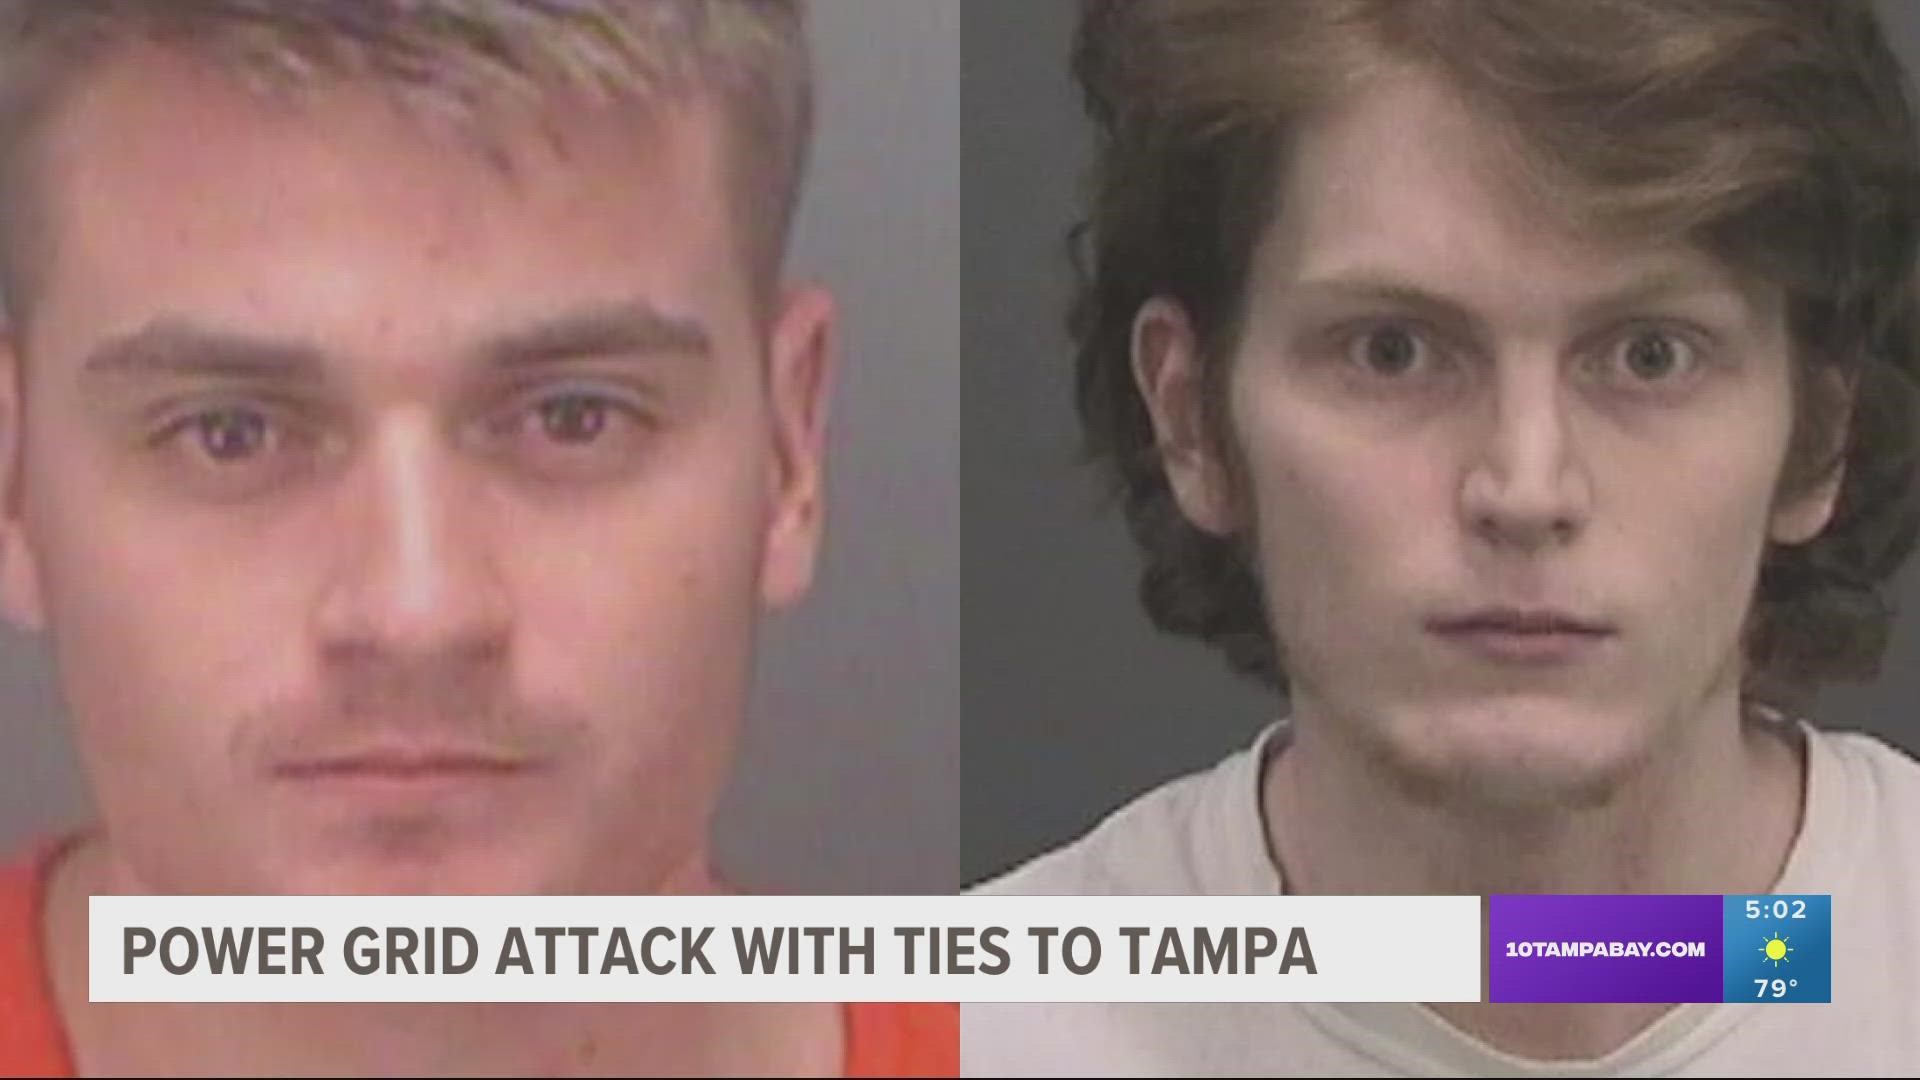 Sarah Beth Clendaniel and Florida neo-Nazi Brandon Russell conspired to attack the Baltimore-area power grid, according to U.S. officials.